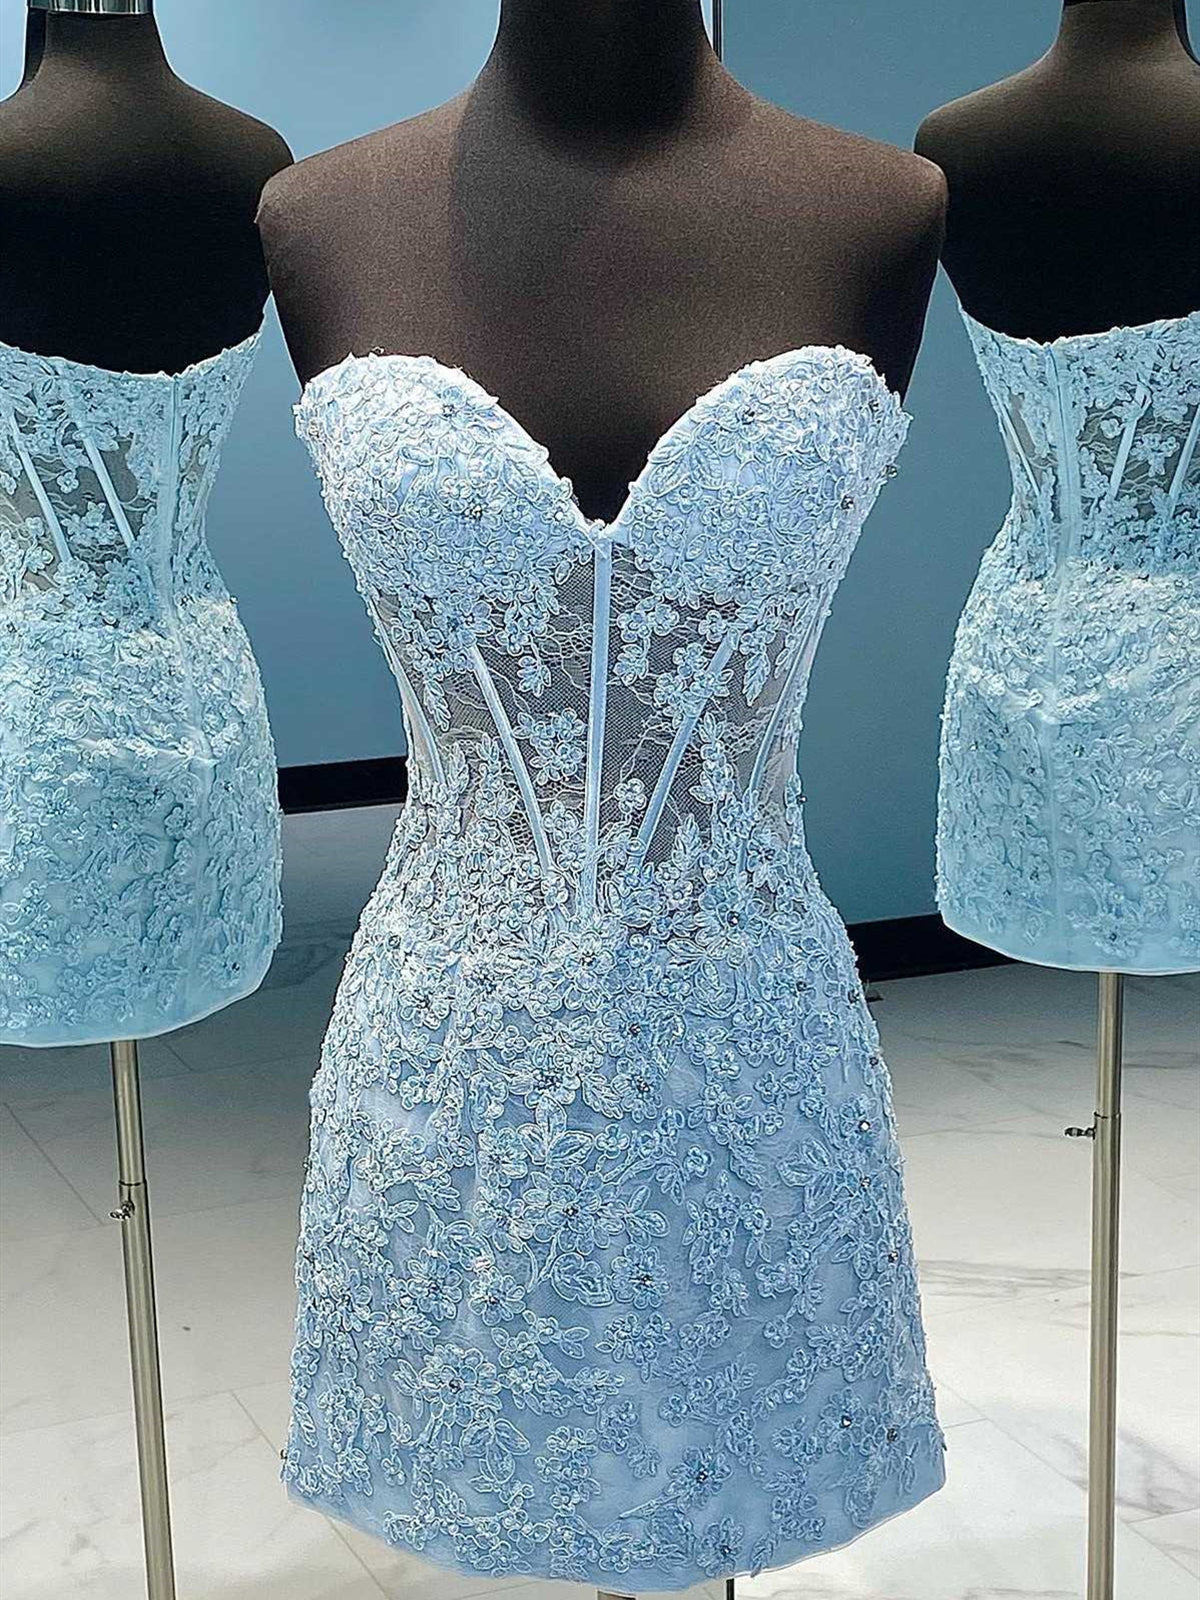 Dream Wedding, Strapless Short Blue Lace Prom Dresses, Short Blue Lace Formal Homecoming Dresses